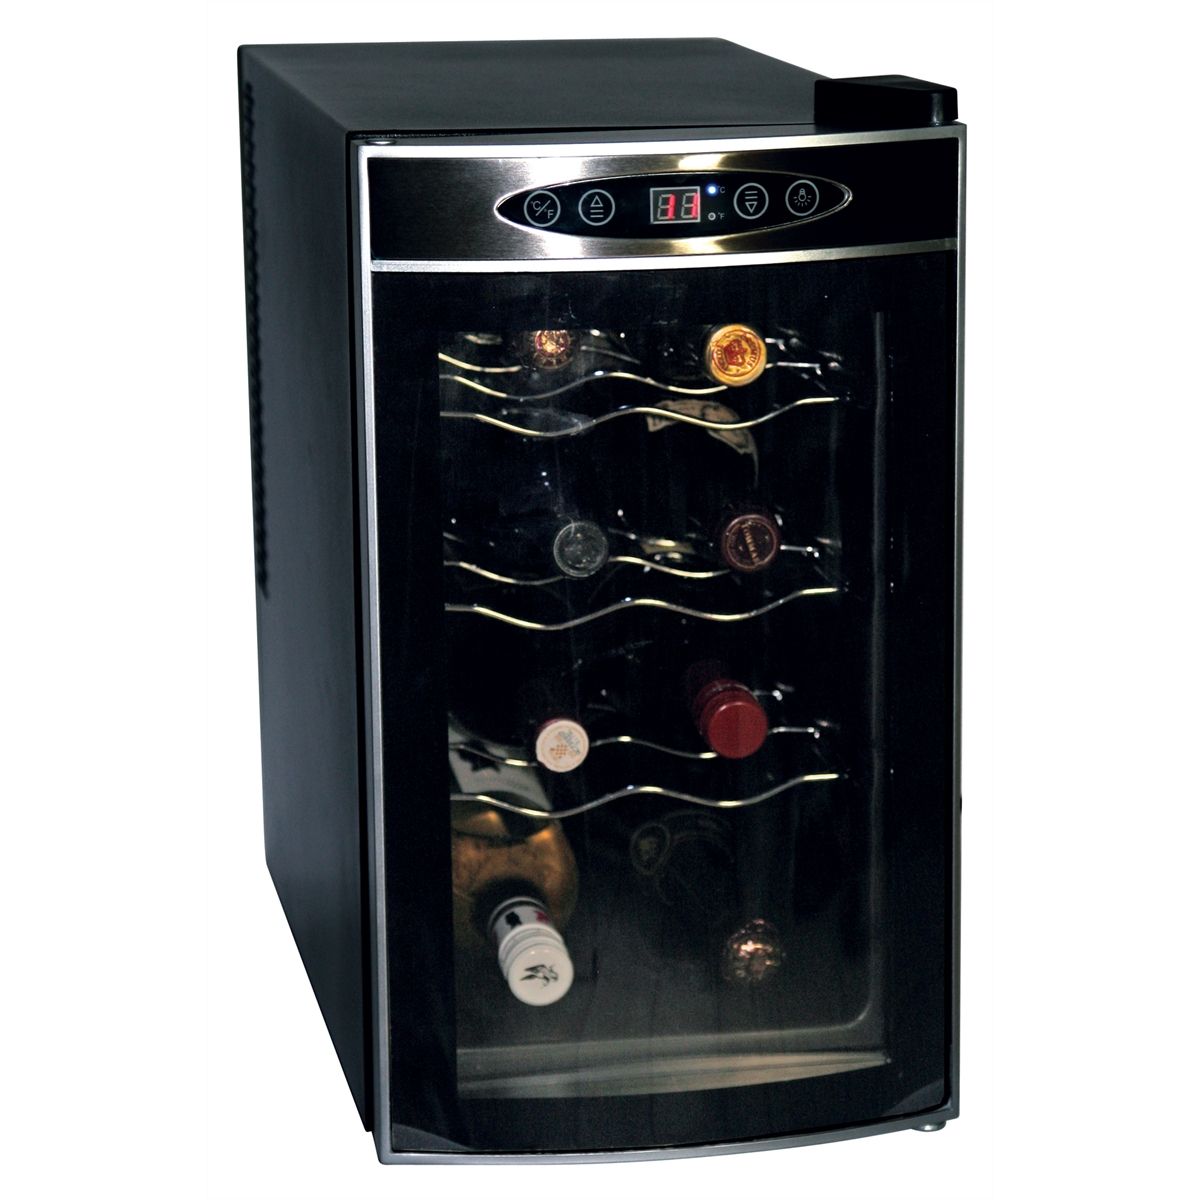 Thermoelectric 8 Bottle Wine Cellar